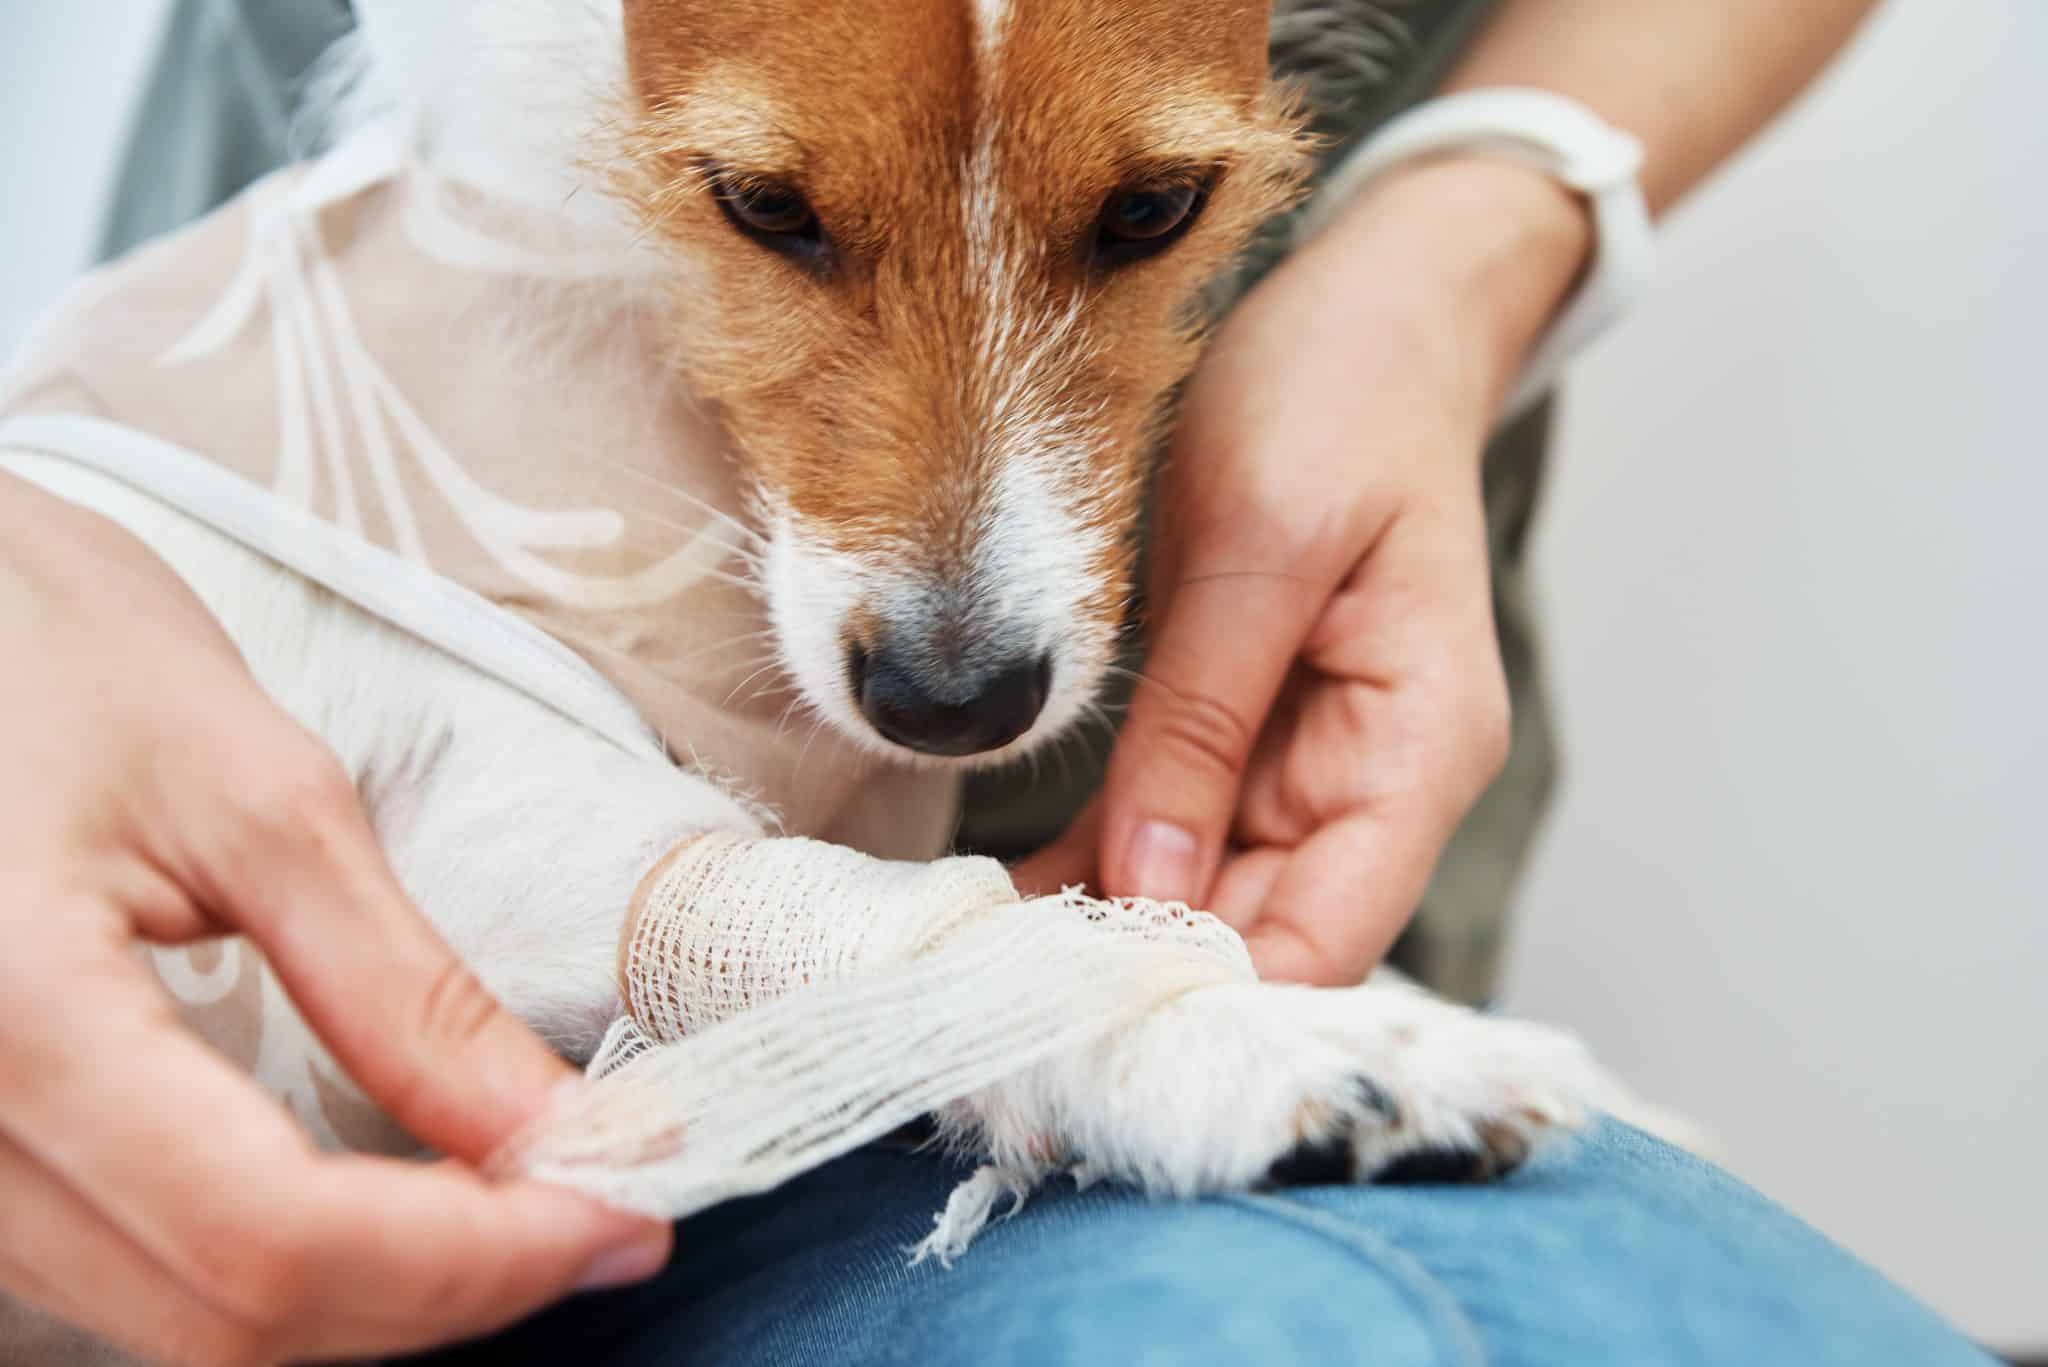 Dog With A Bandage On His Paw. Pet Care